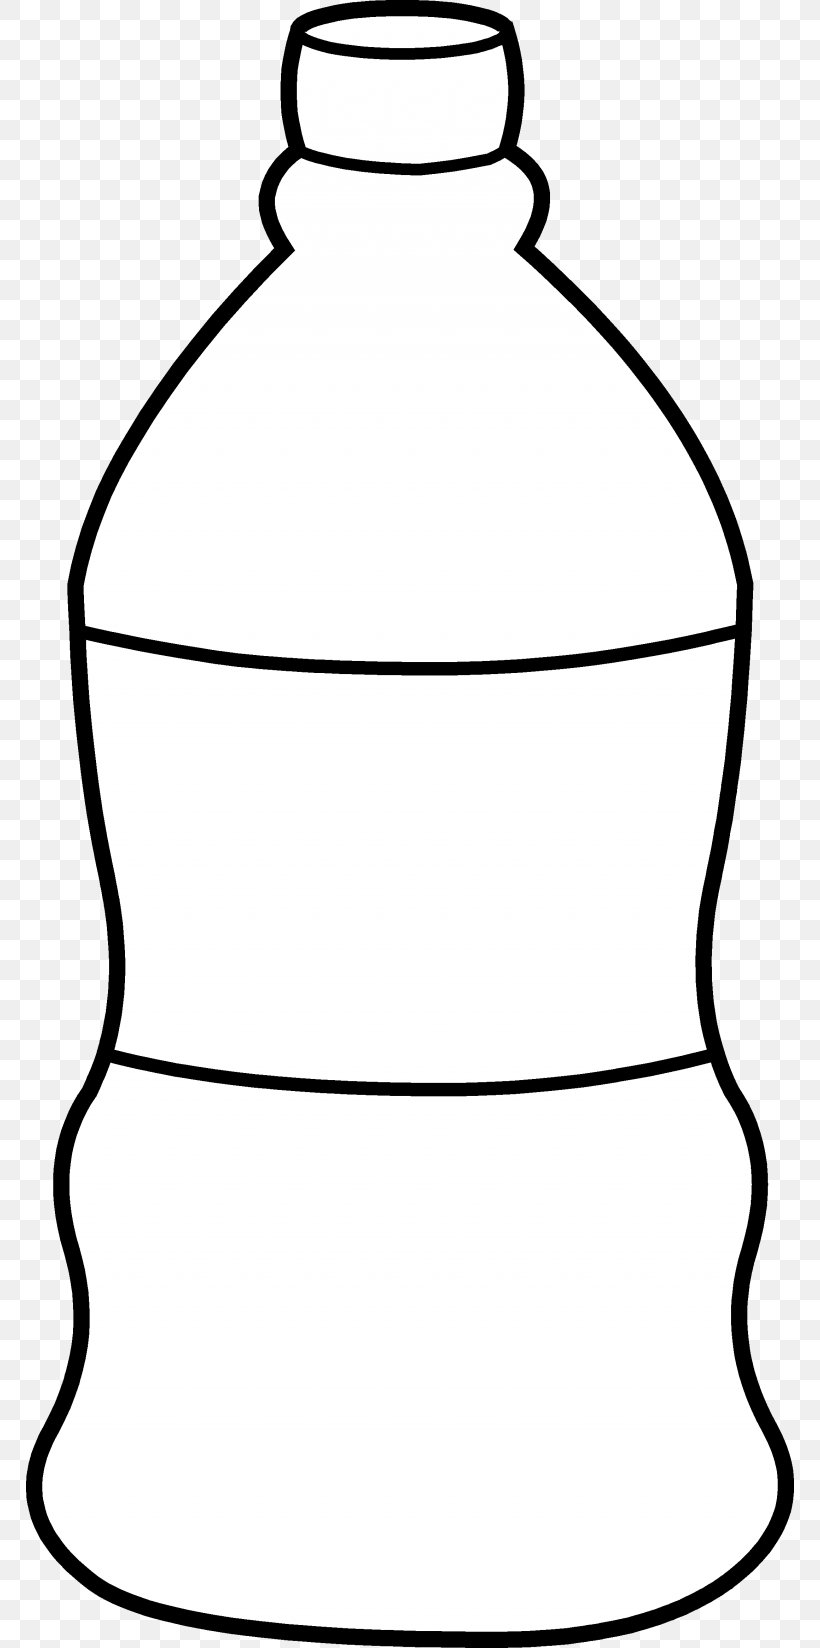 Coloring Book Water Bottles Bottled Water Clip Art, PNG, 768x1648px, Coloring Book, Black And White, Bottle, Bottled Water, Color Download Free